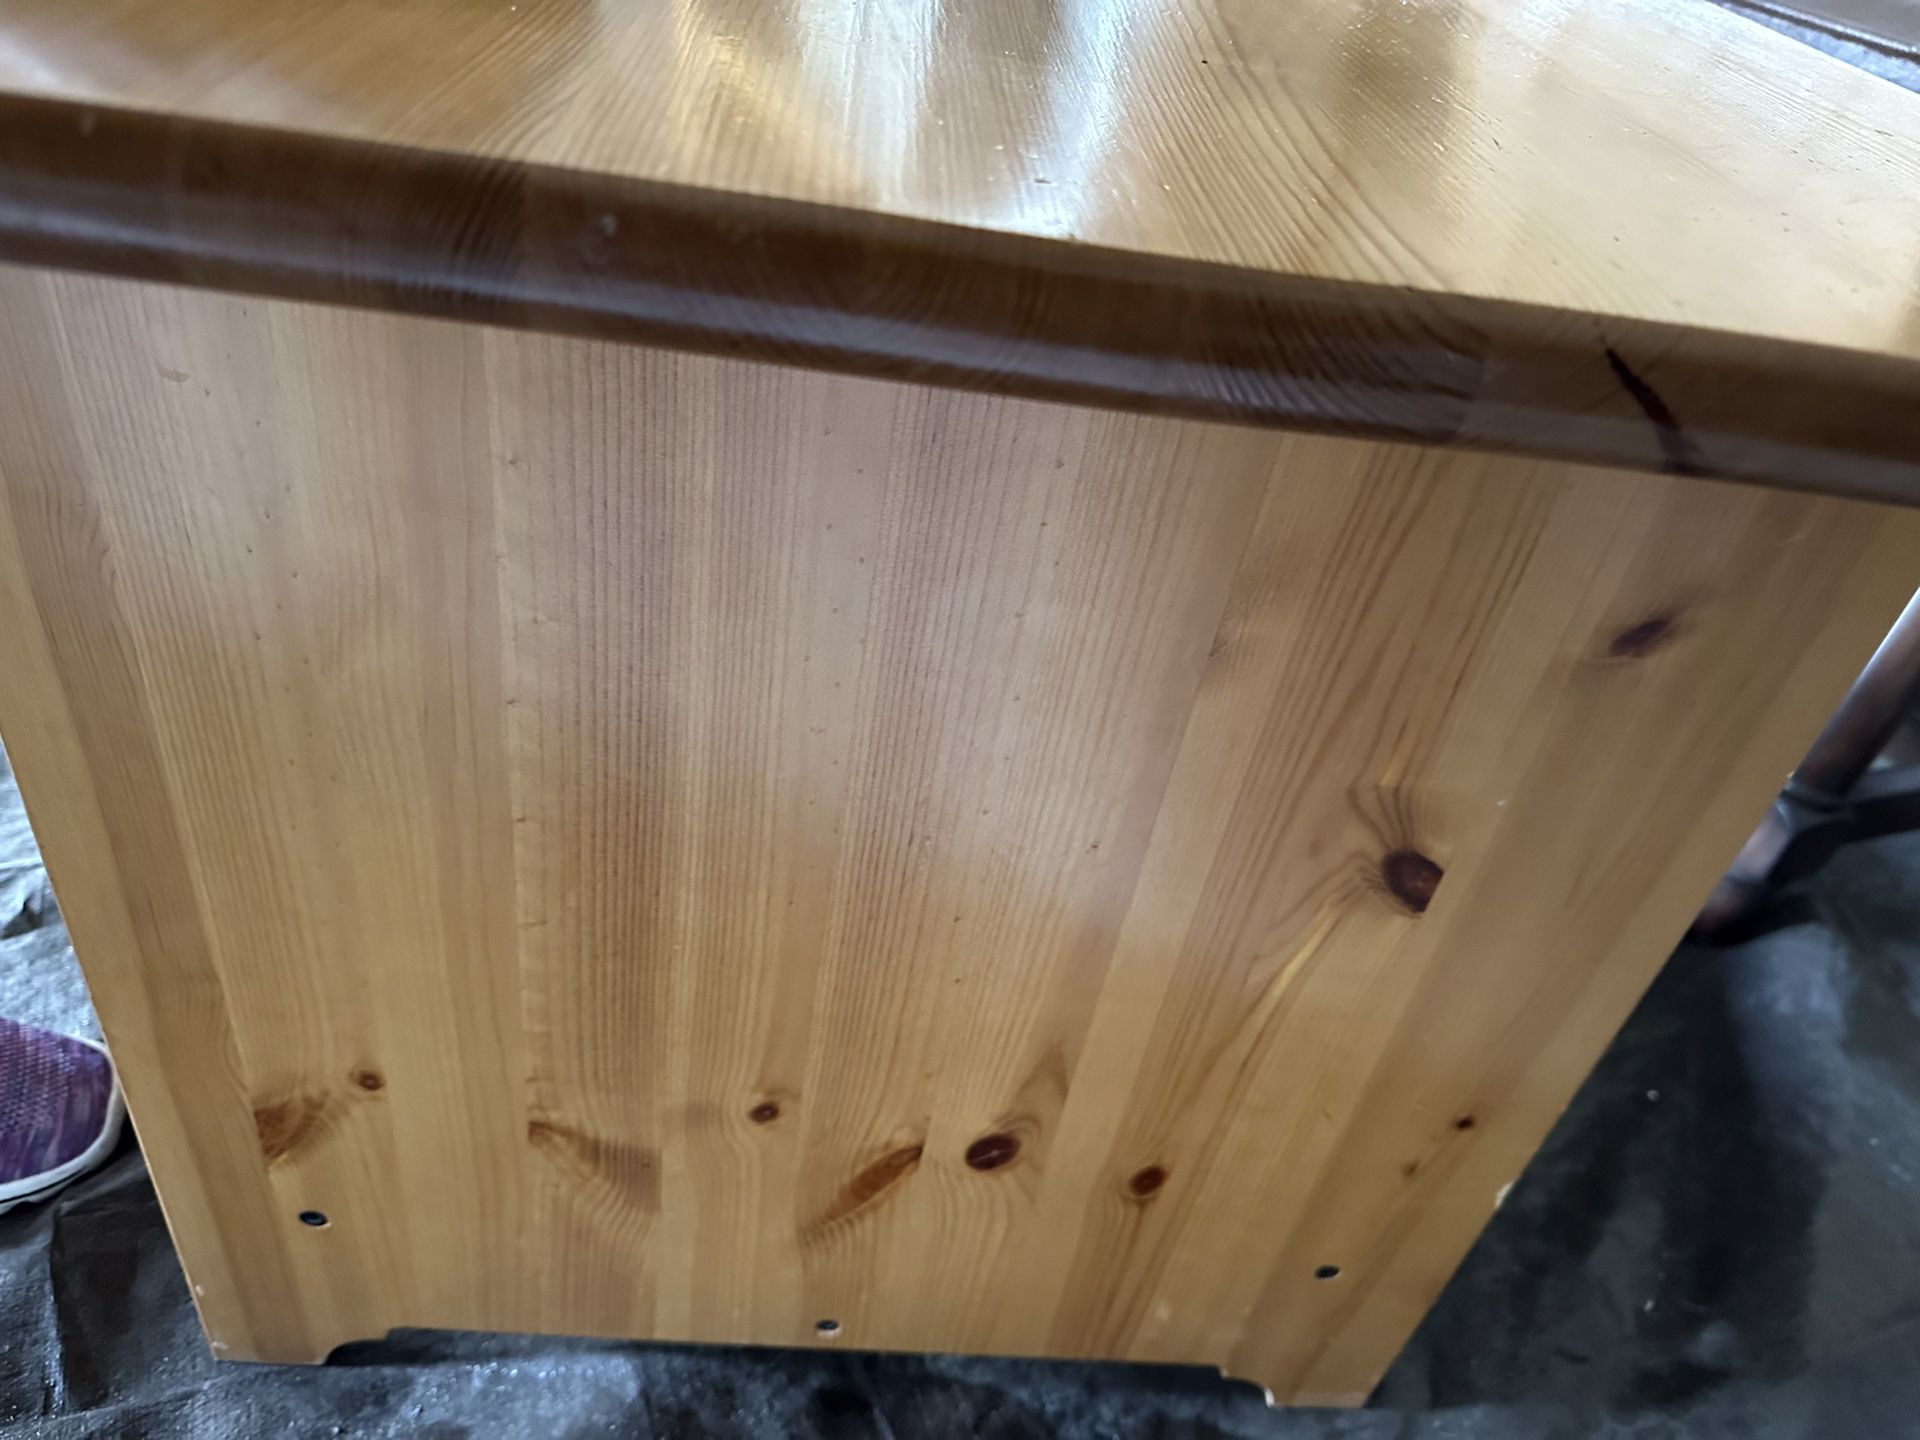 Large Craft Table for Sale in Evergreen, CO - OfferUp